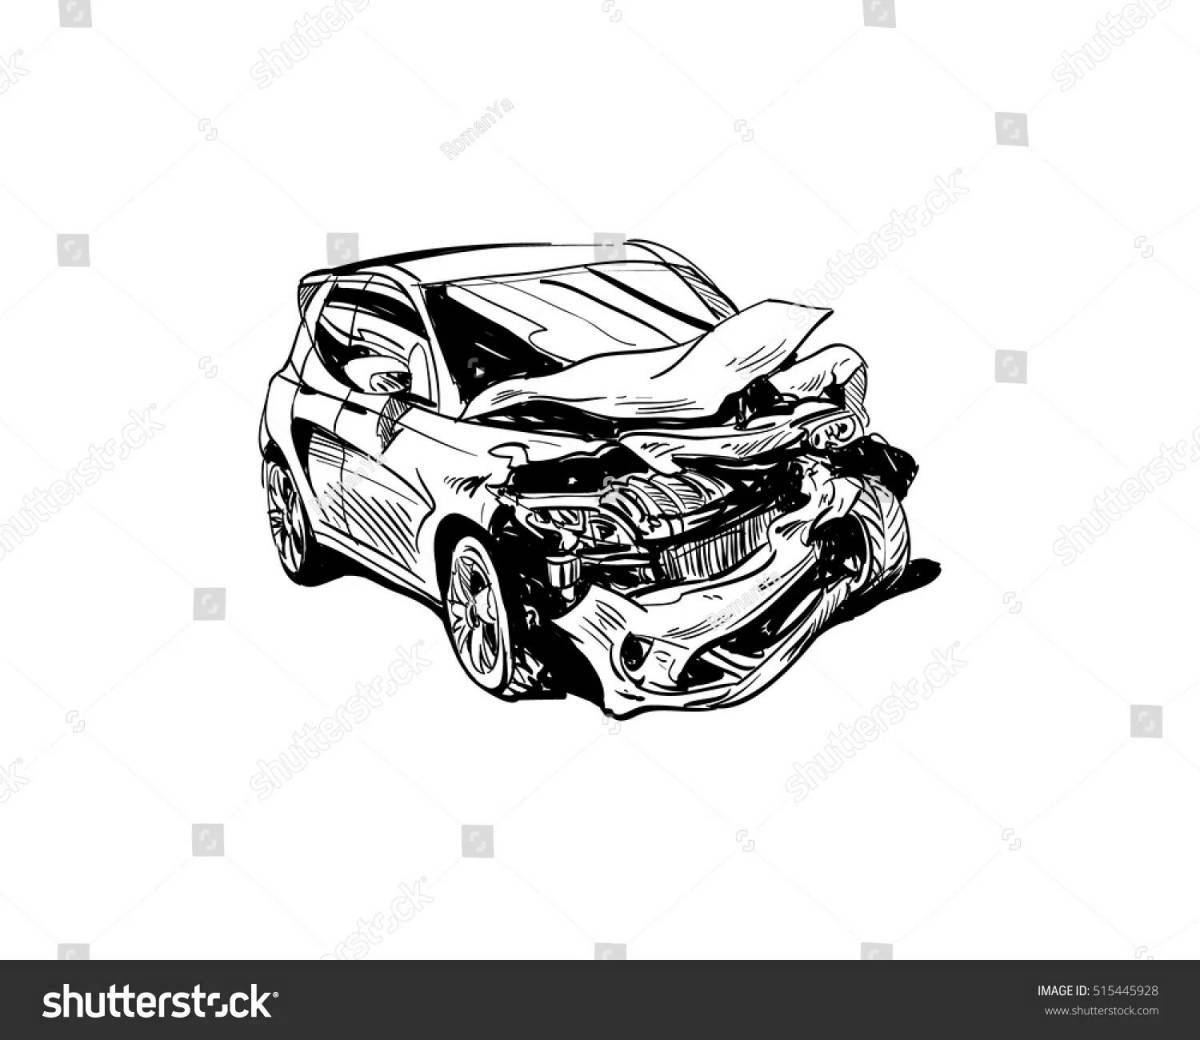 Brilliant crashed car coloring page